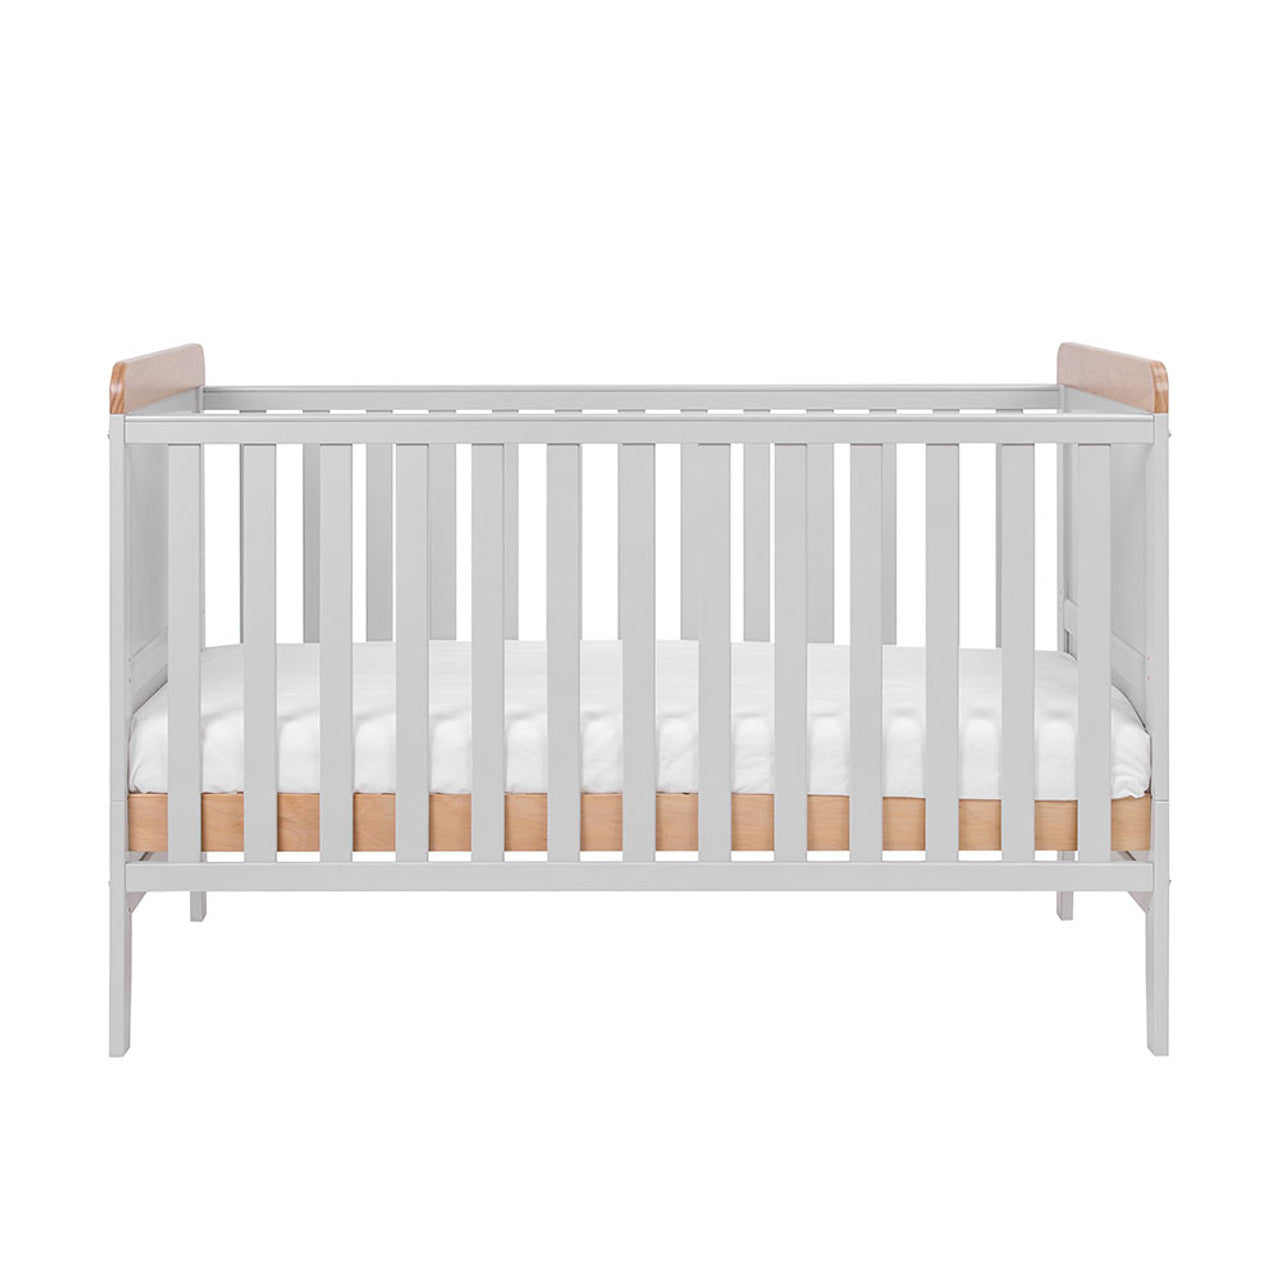 Tutti Bambini Rio Cot Bed with Cot Top Changer & Mattress - Grey/Oak -  | For Your Little One